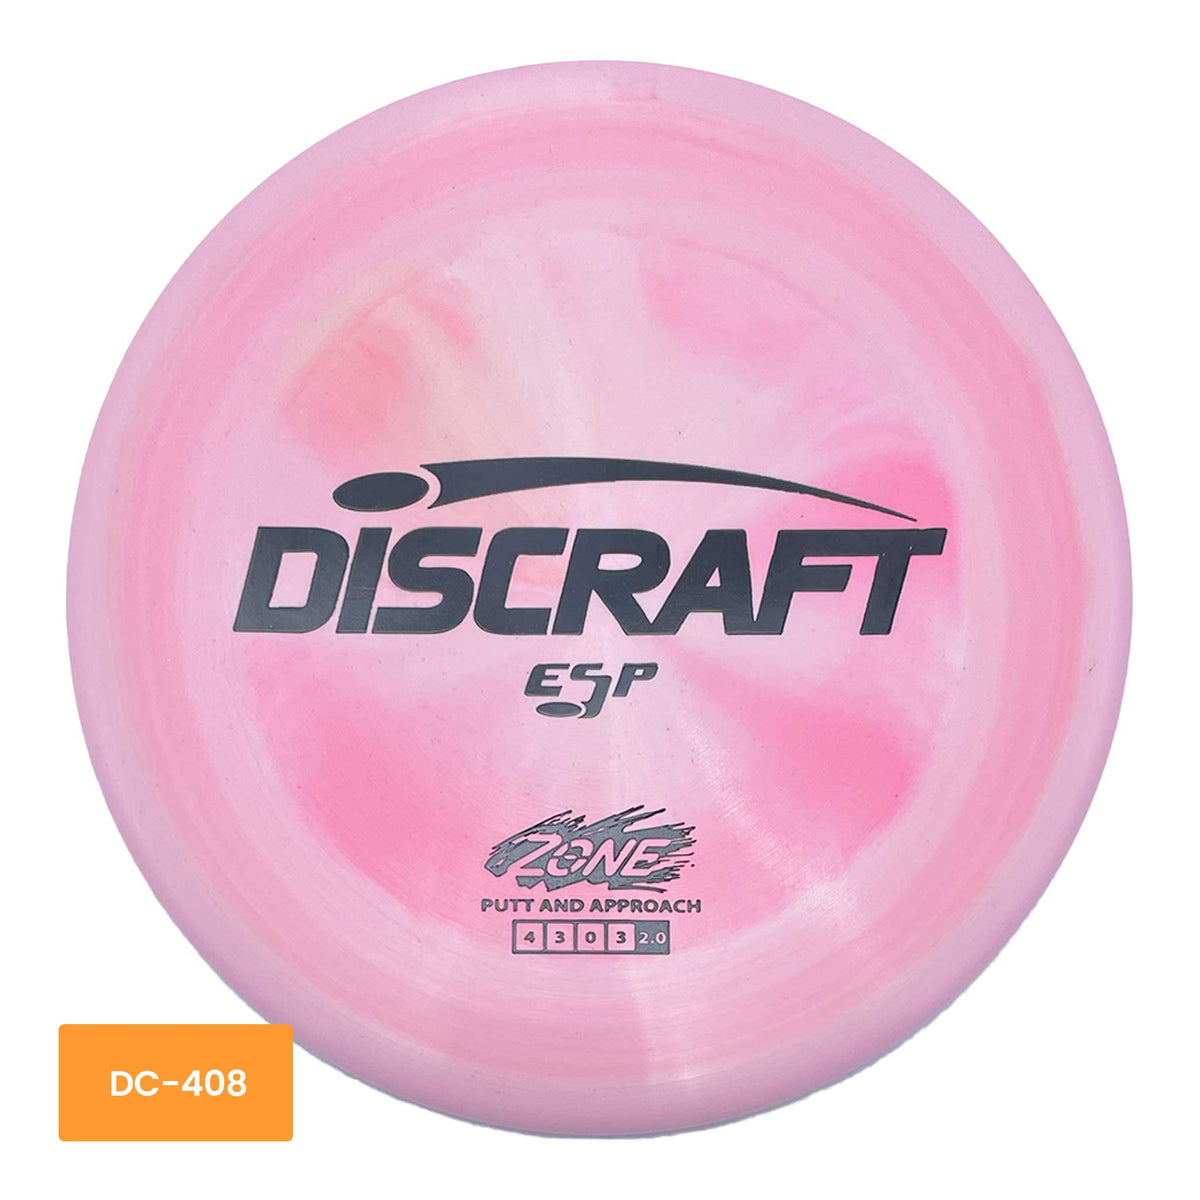 Discraft ESP Zone putter and approach - Pink